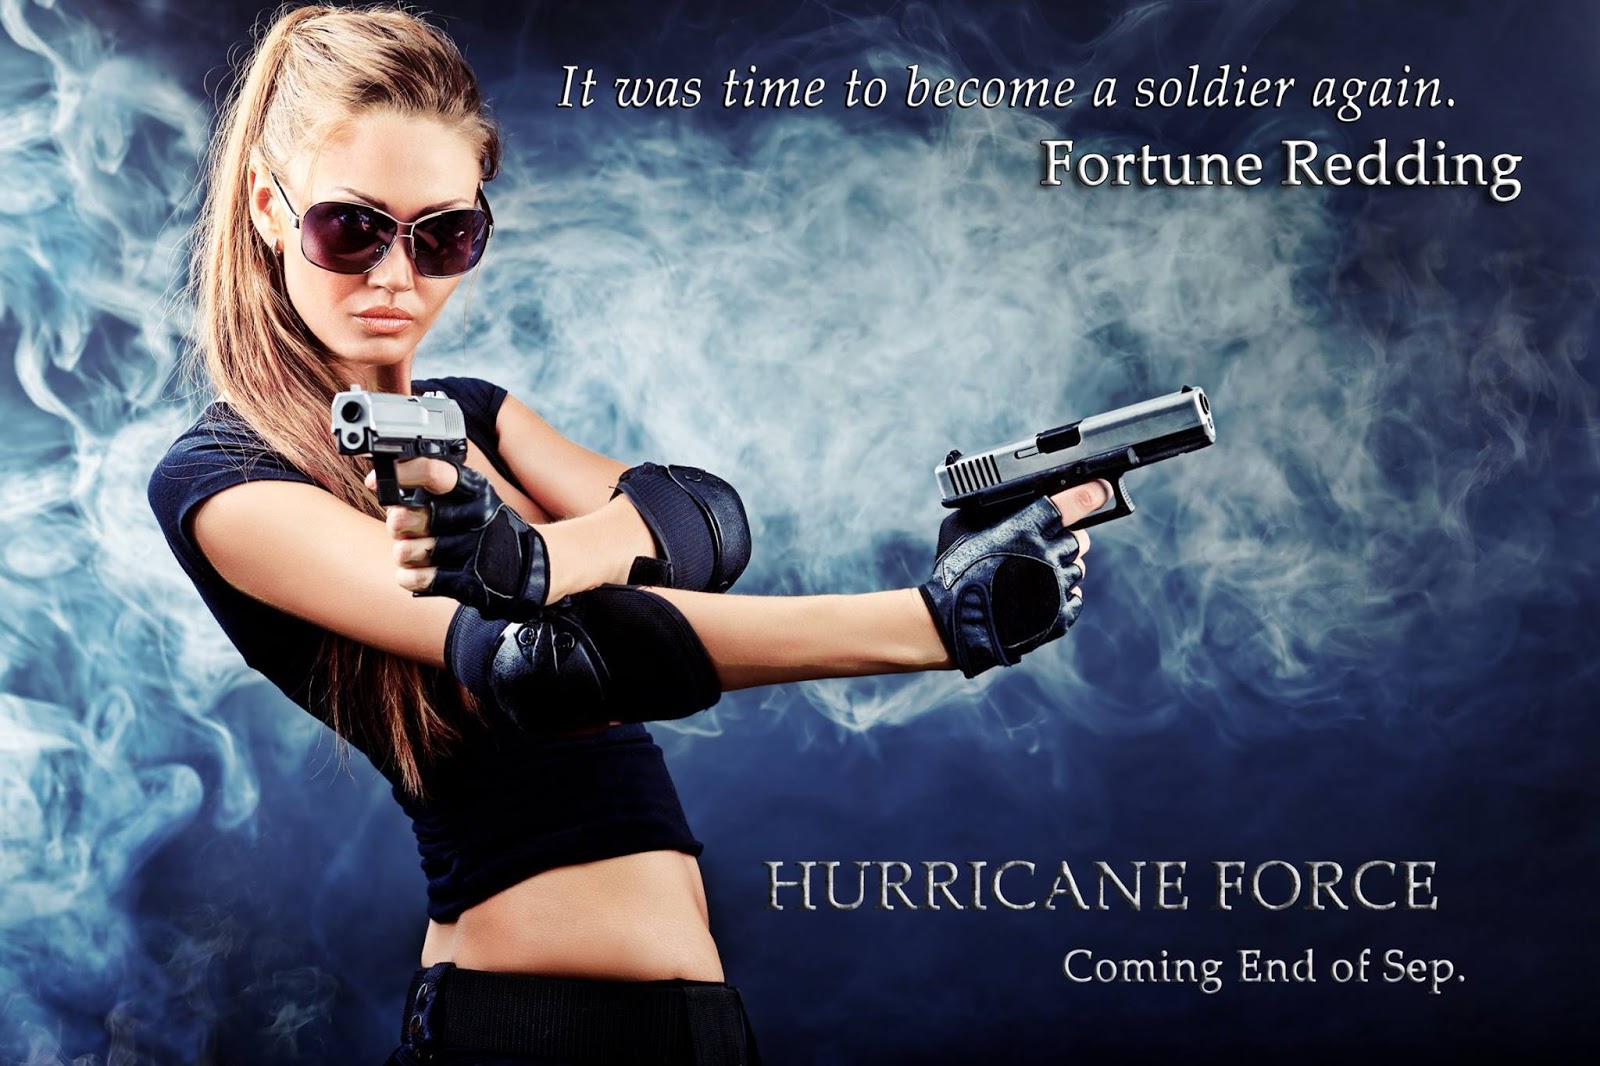 Hurricane Force ~ A Miss Fortune Series by Jana DeLeon – Southern Charm  Book Blog